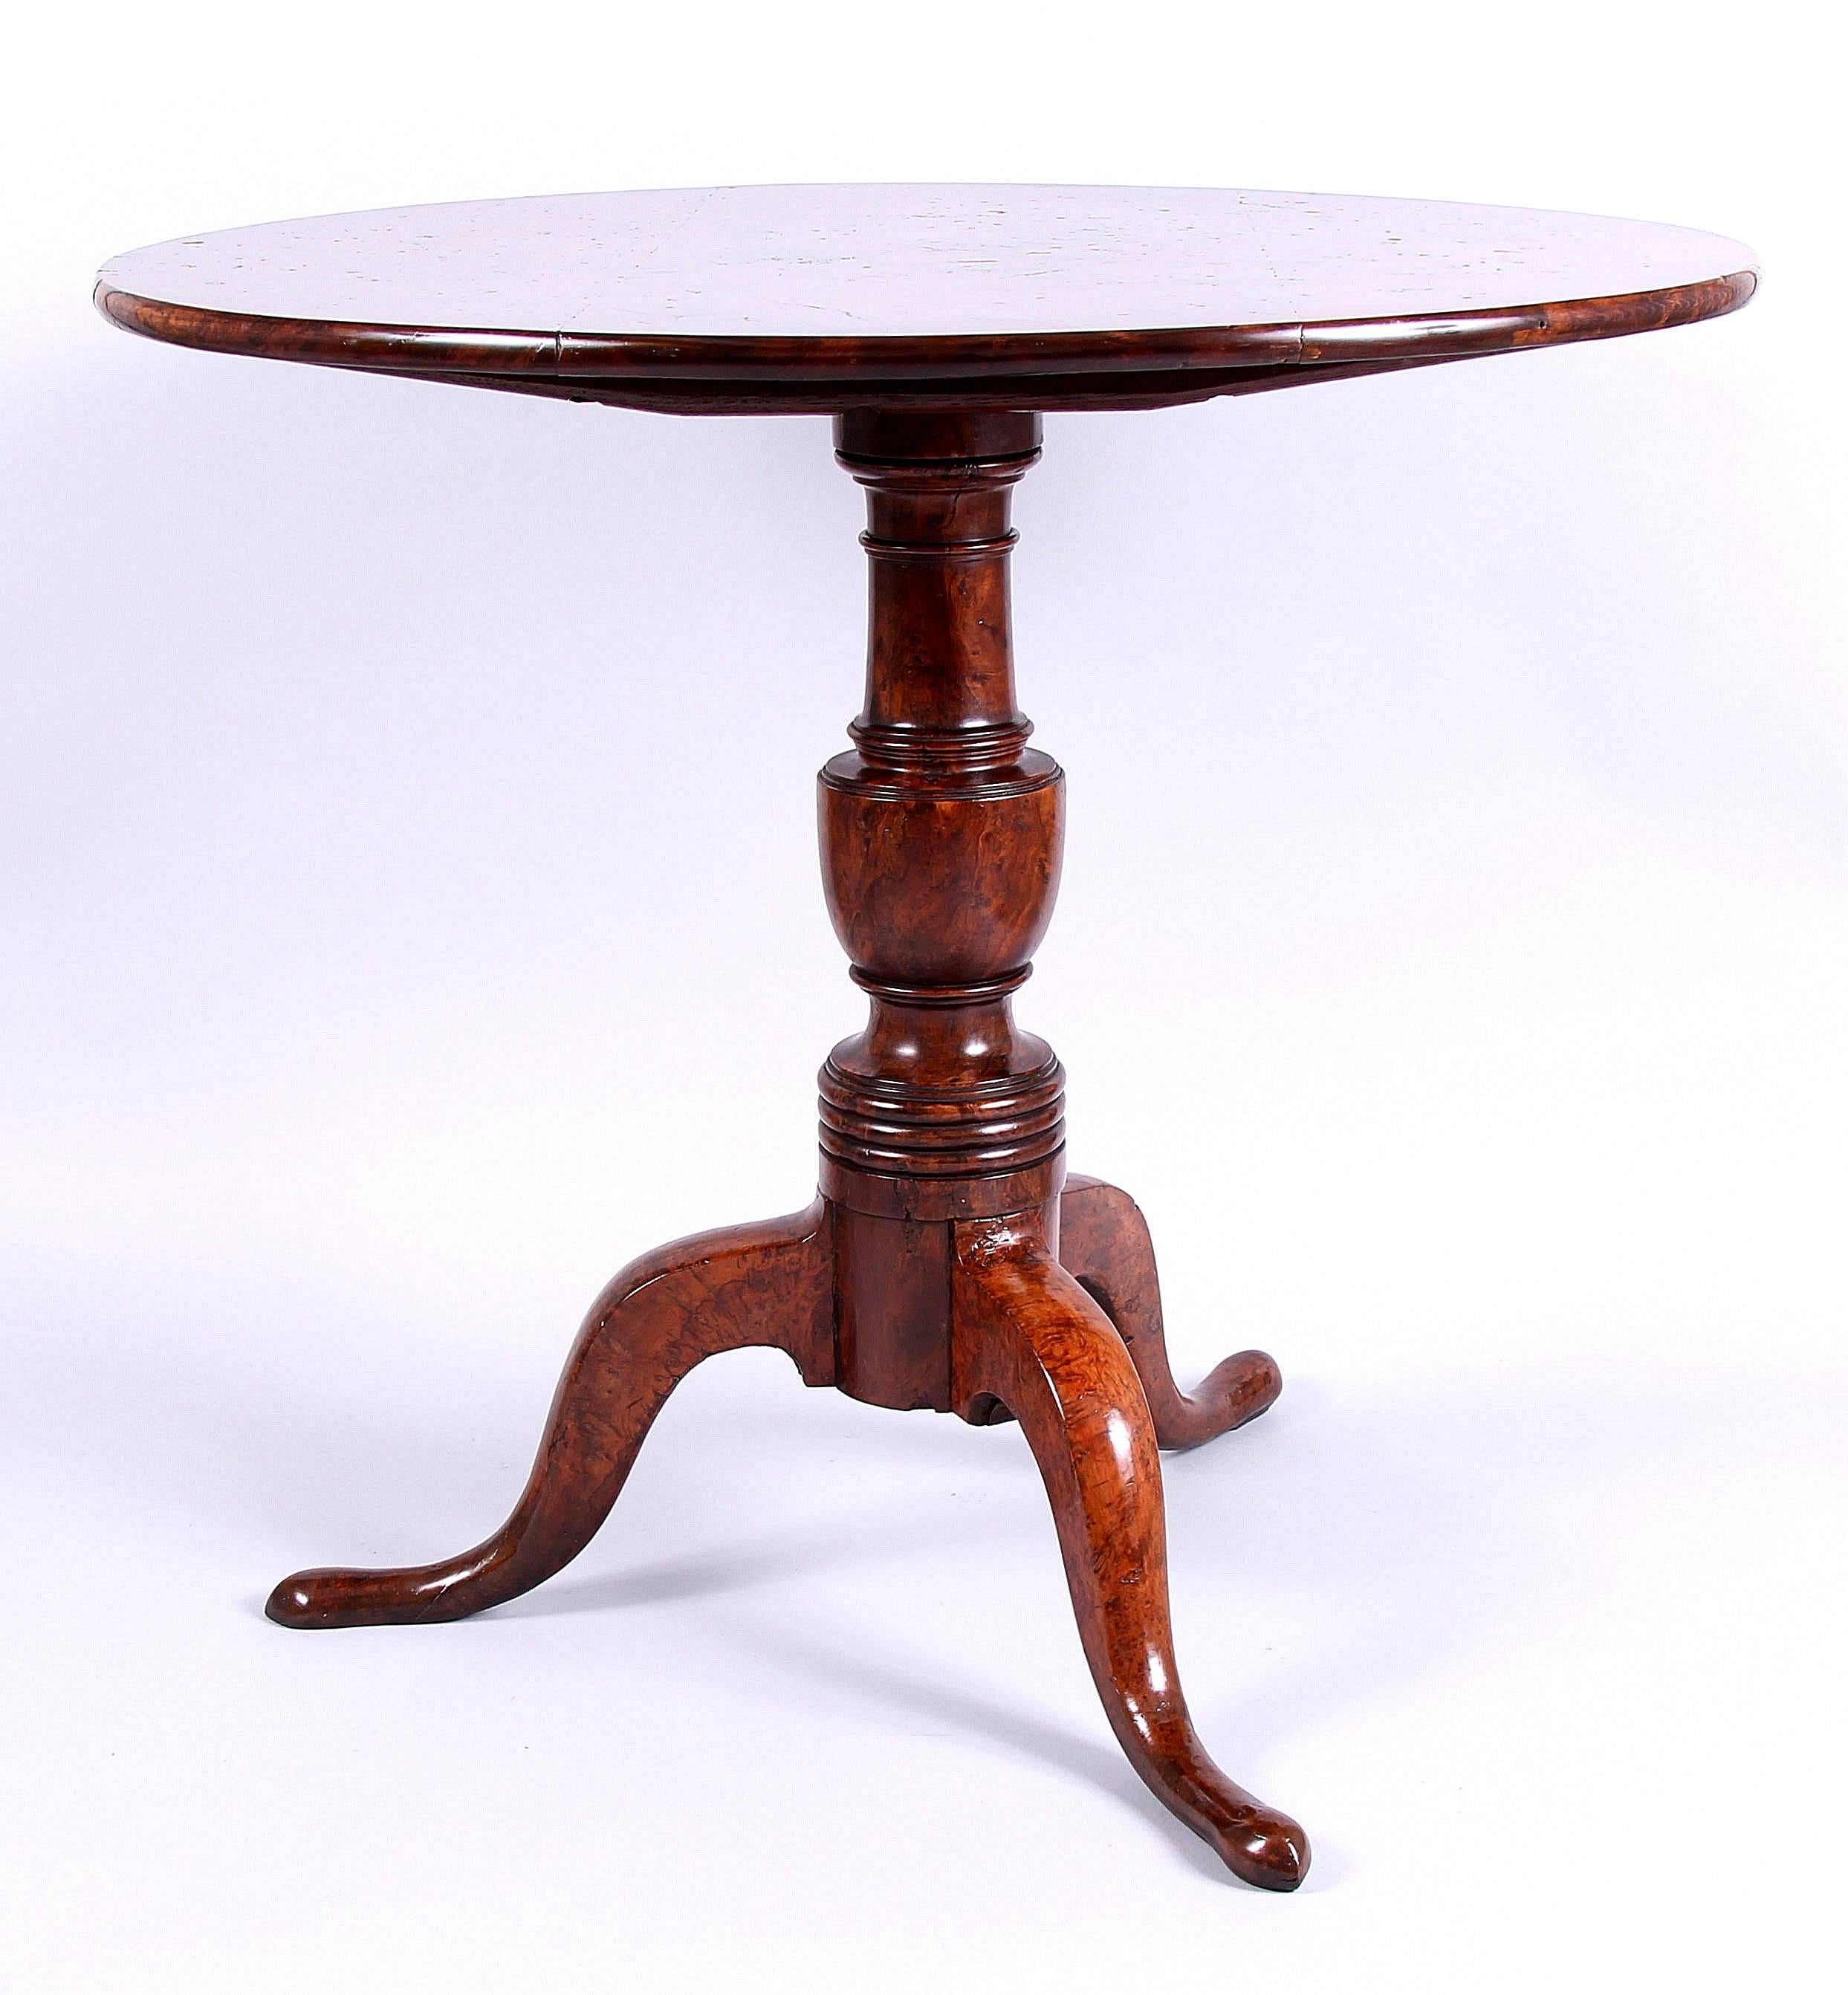 Incredibly rare George II solid burr yew tilt-top tripod table, circa 1740 with solid burr Yew top, solid burr yew column and solid burr yew legs.

Perhaps one of the rarest 18th century tables ever made. The colour, figuration and patina on this